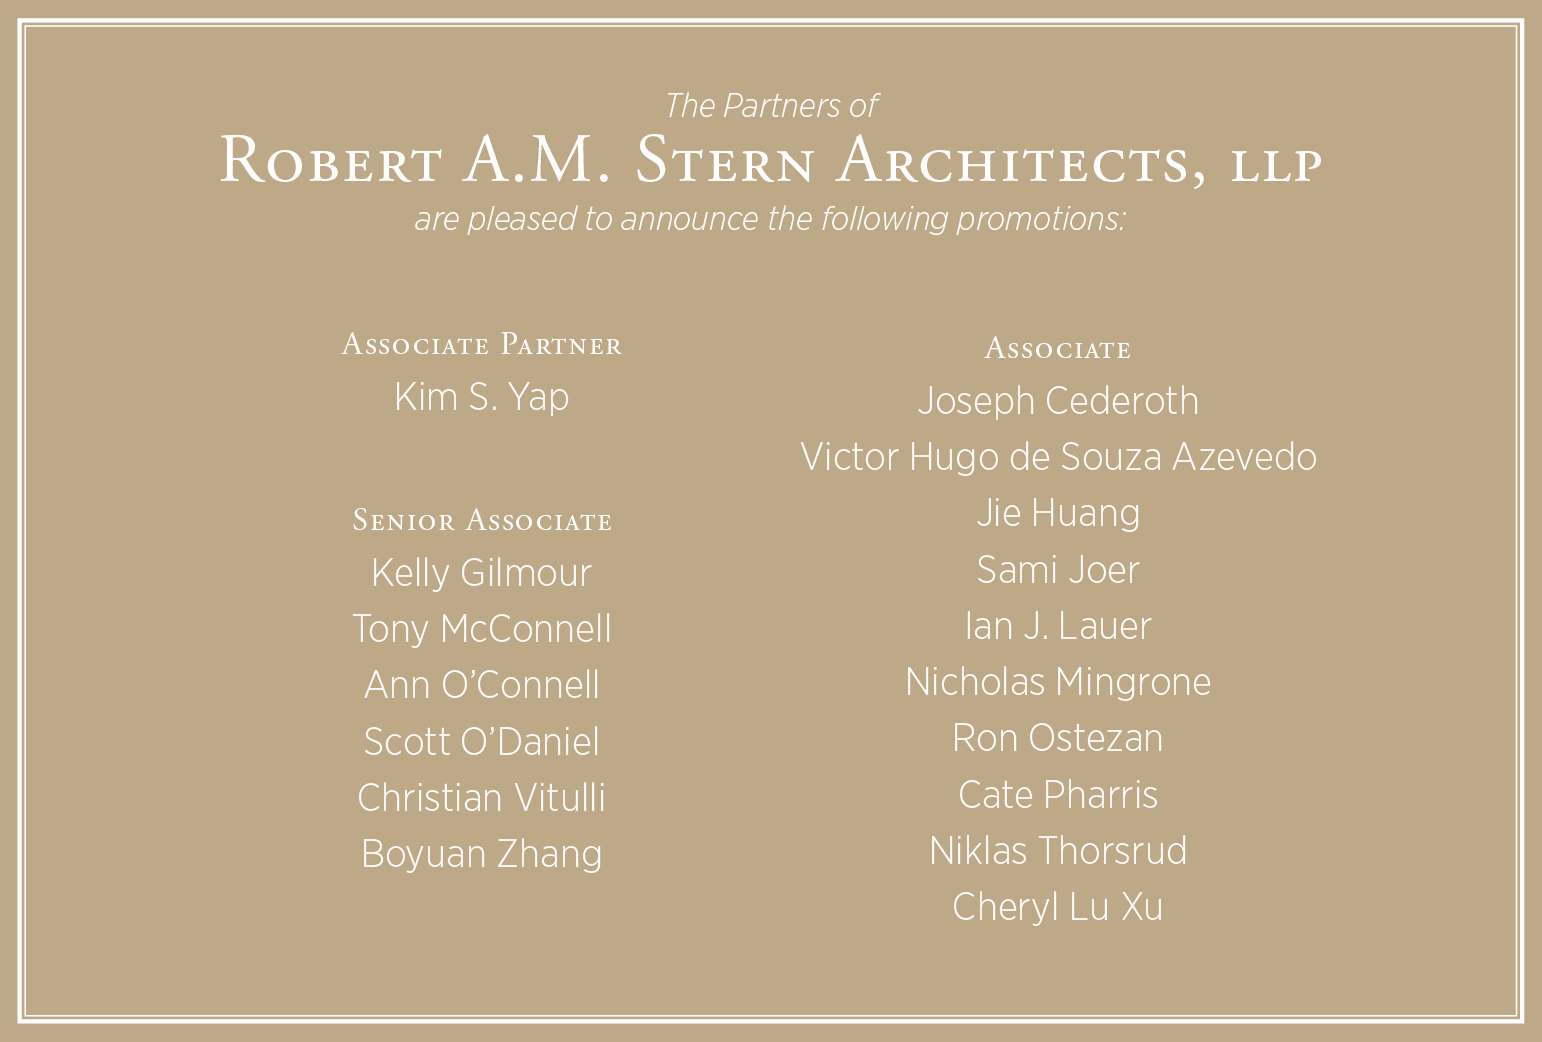 Robert A.M. Stern Architects Announces New Promotions